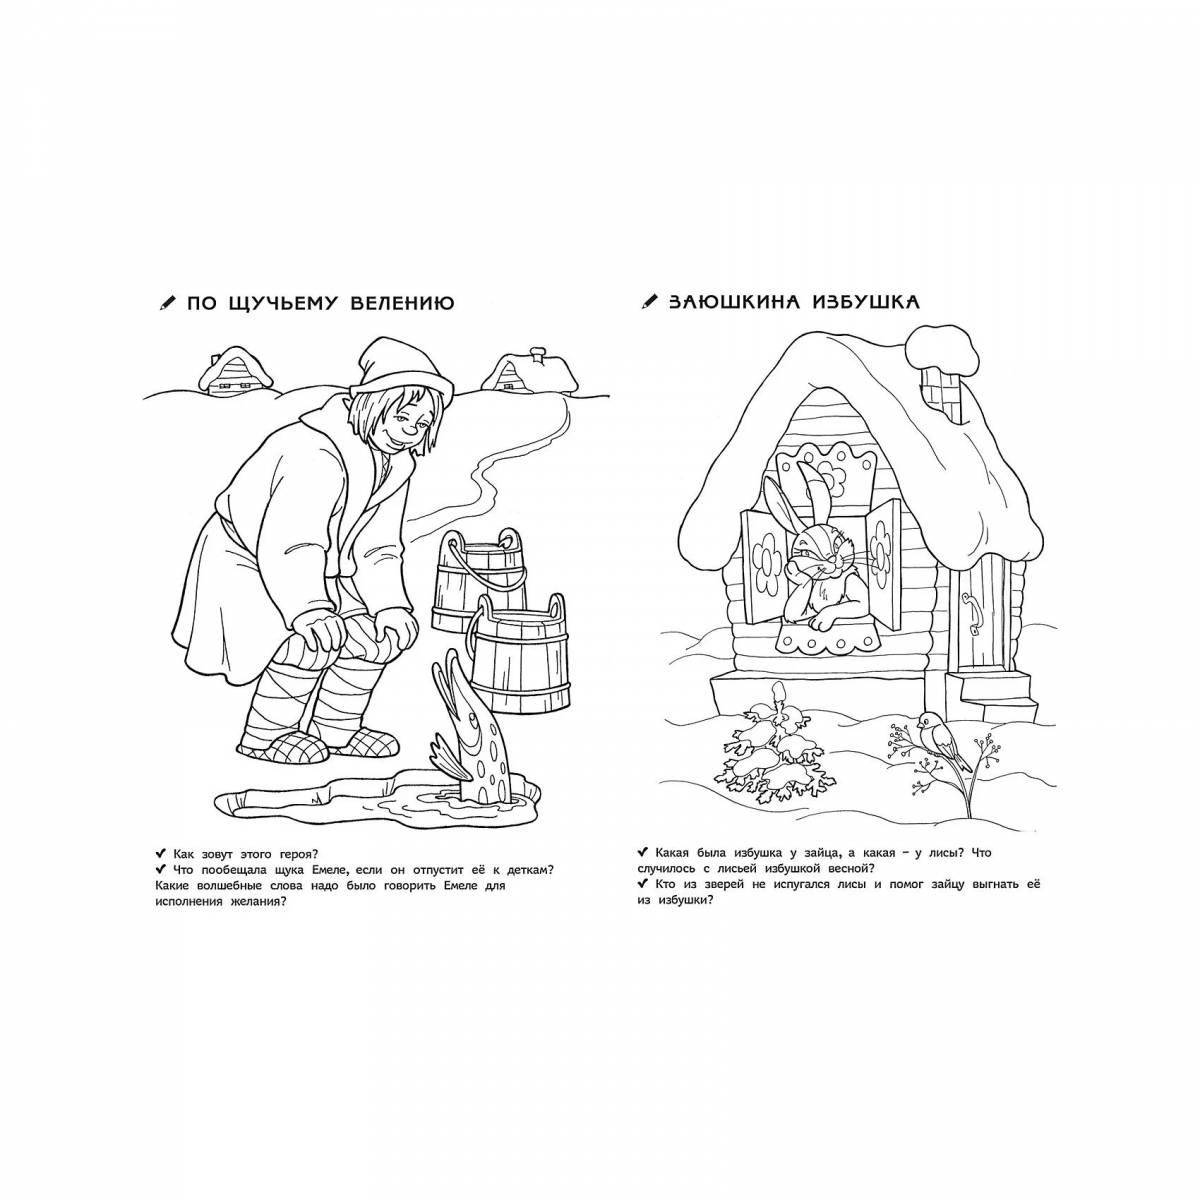 Coloring book animated Russian folk tales